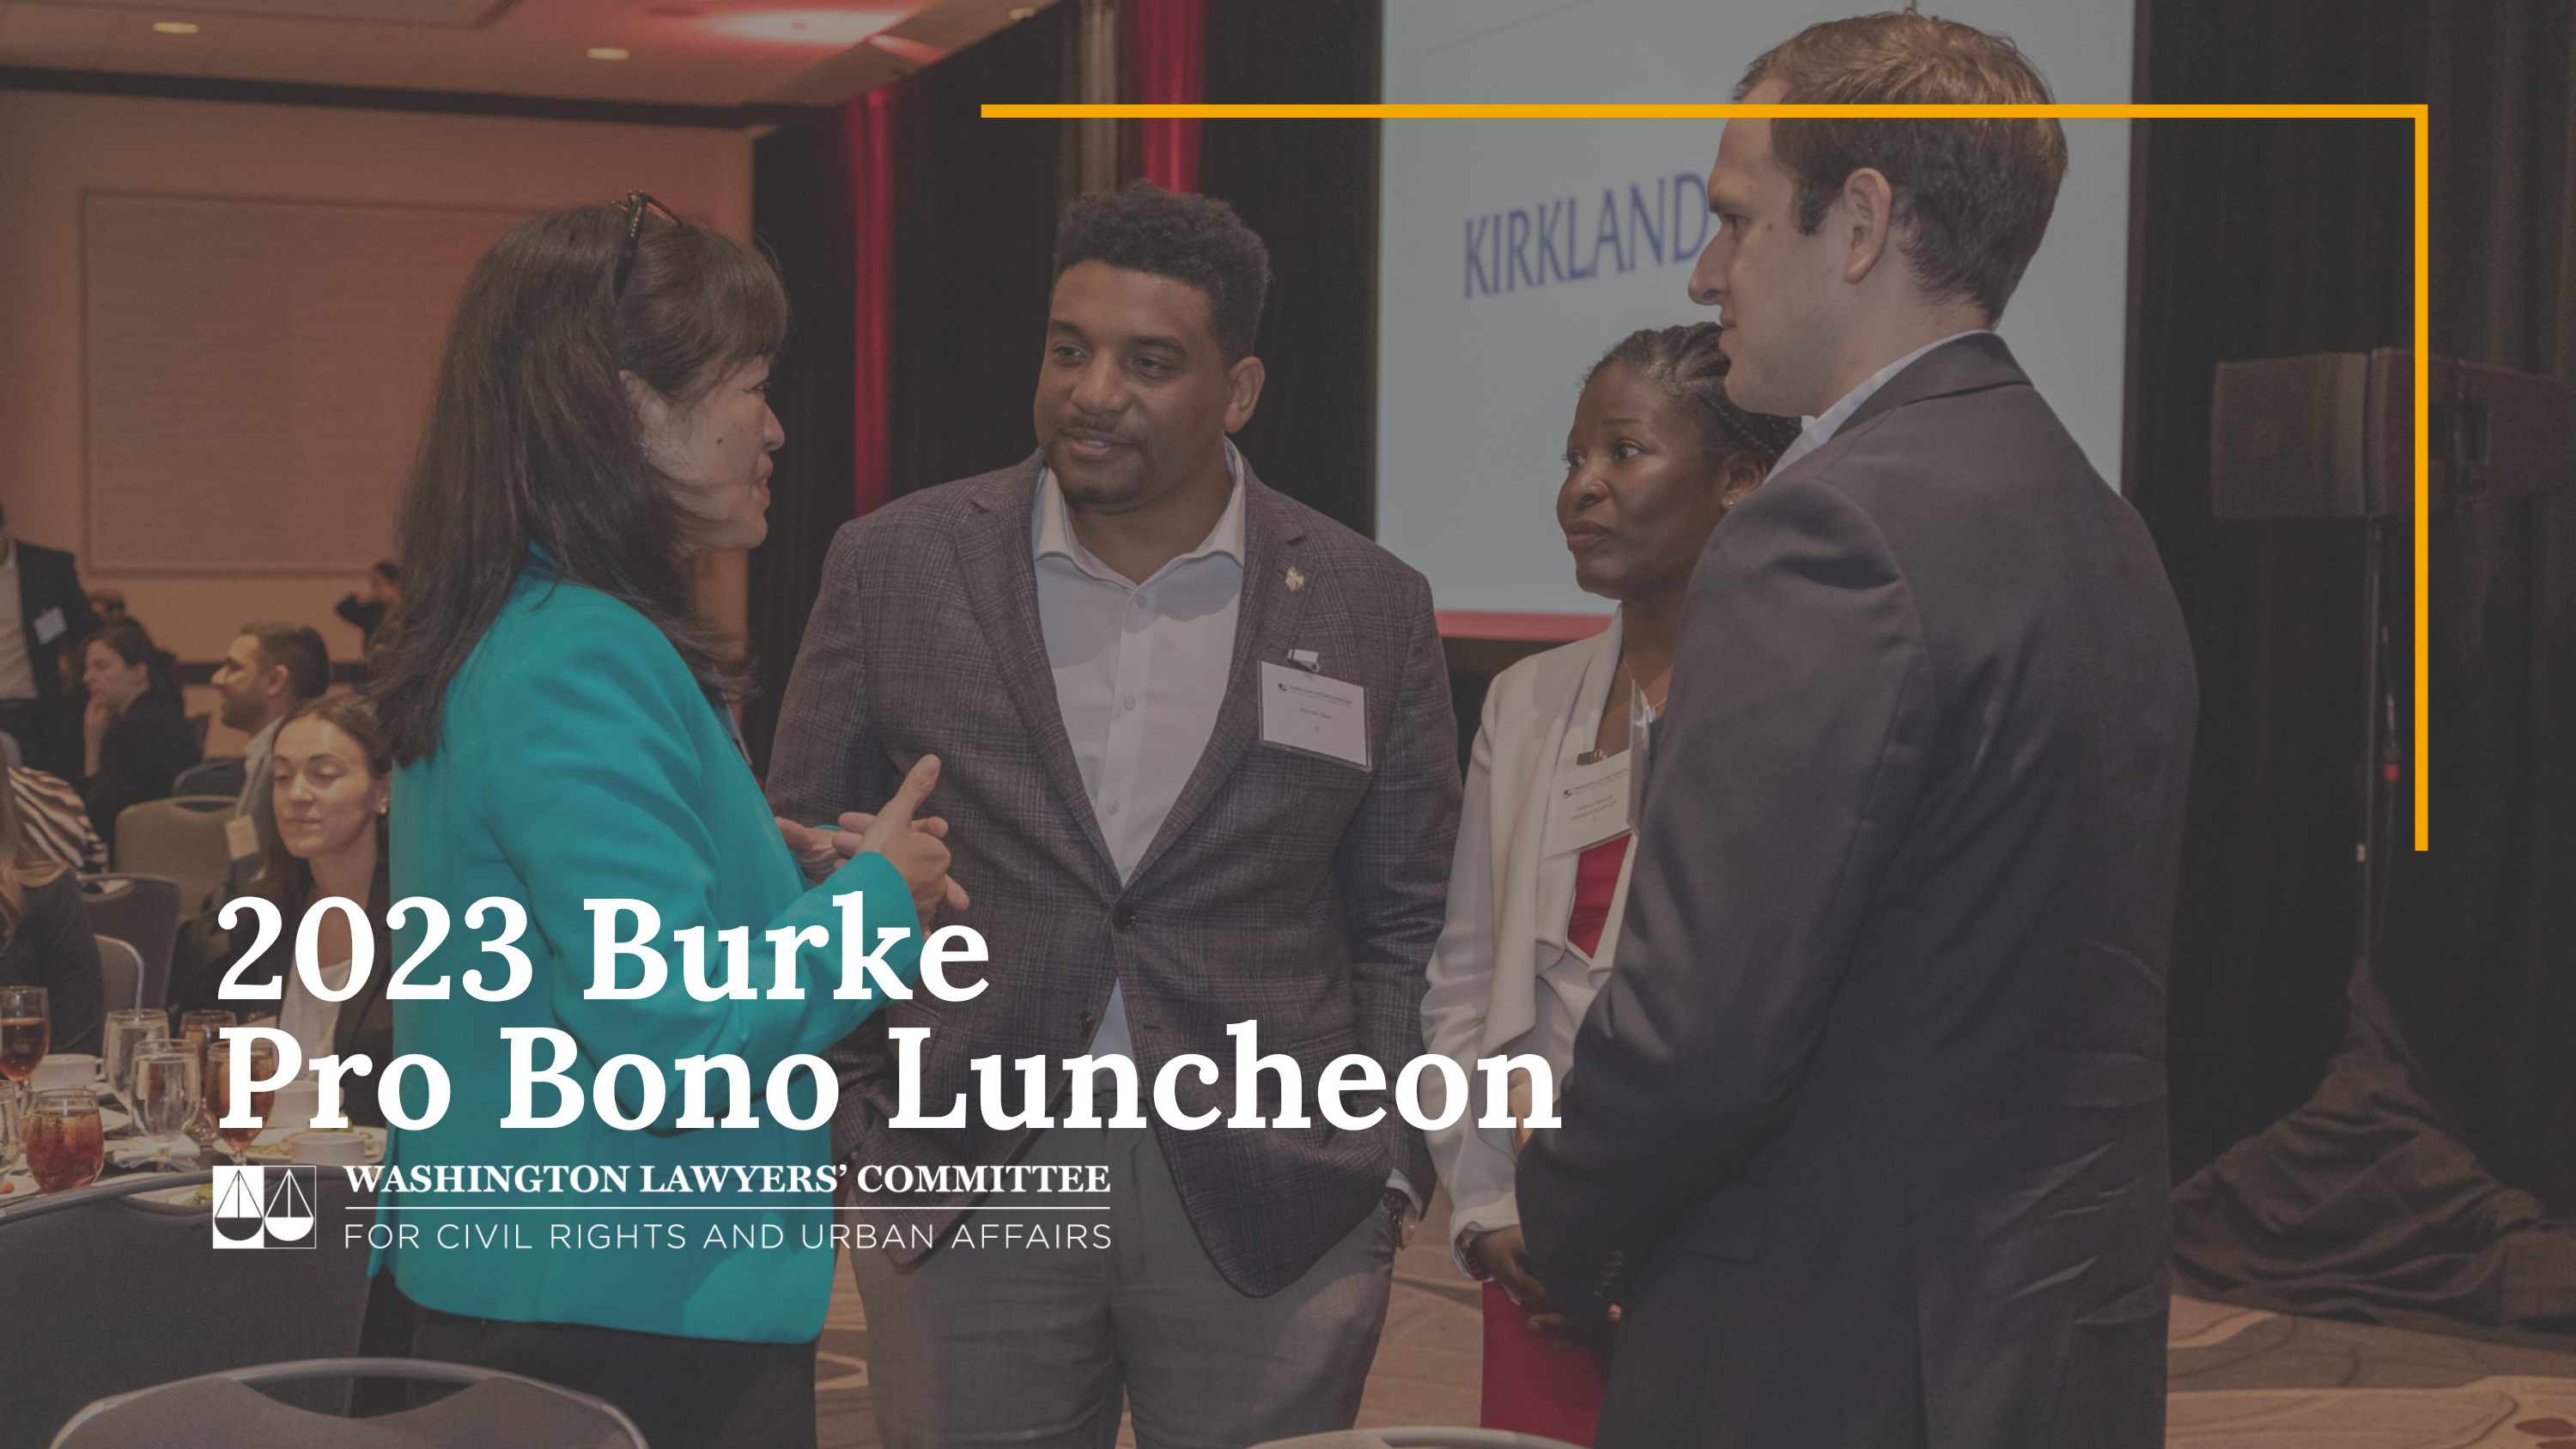 Photo of a group of people chatting including Joanne Lin, Executive Director, at the 2023 Branton Luncheon. Overlaying white text reads "2023 Burke Pro Bono Luncheon" and a white Washington Lawyers' Committee logo